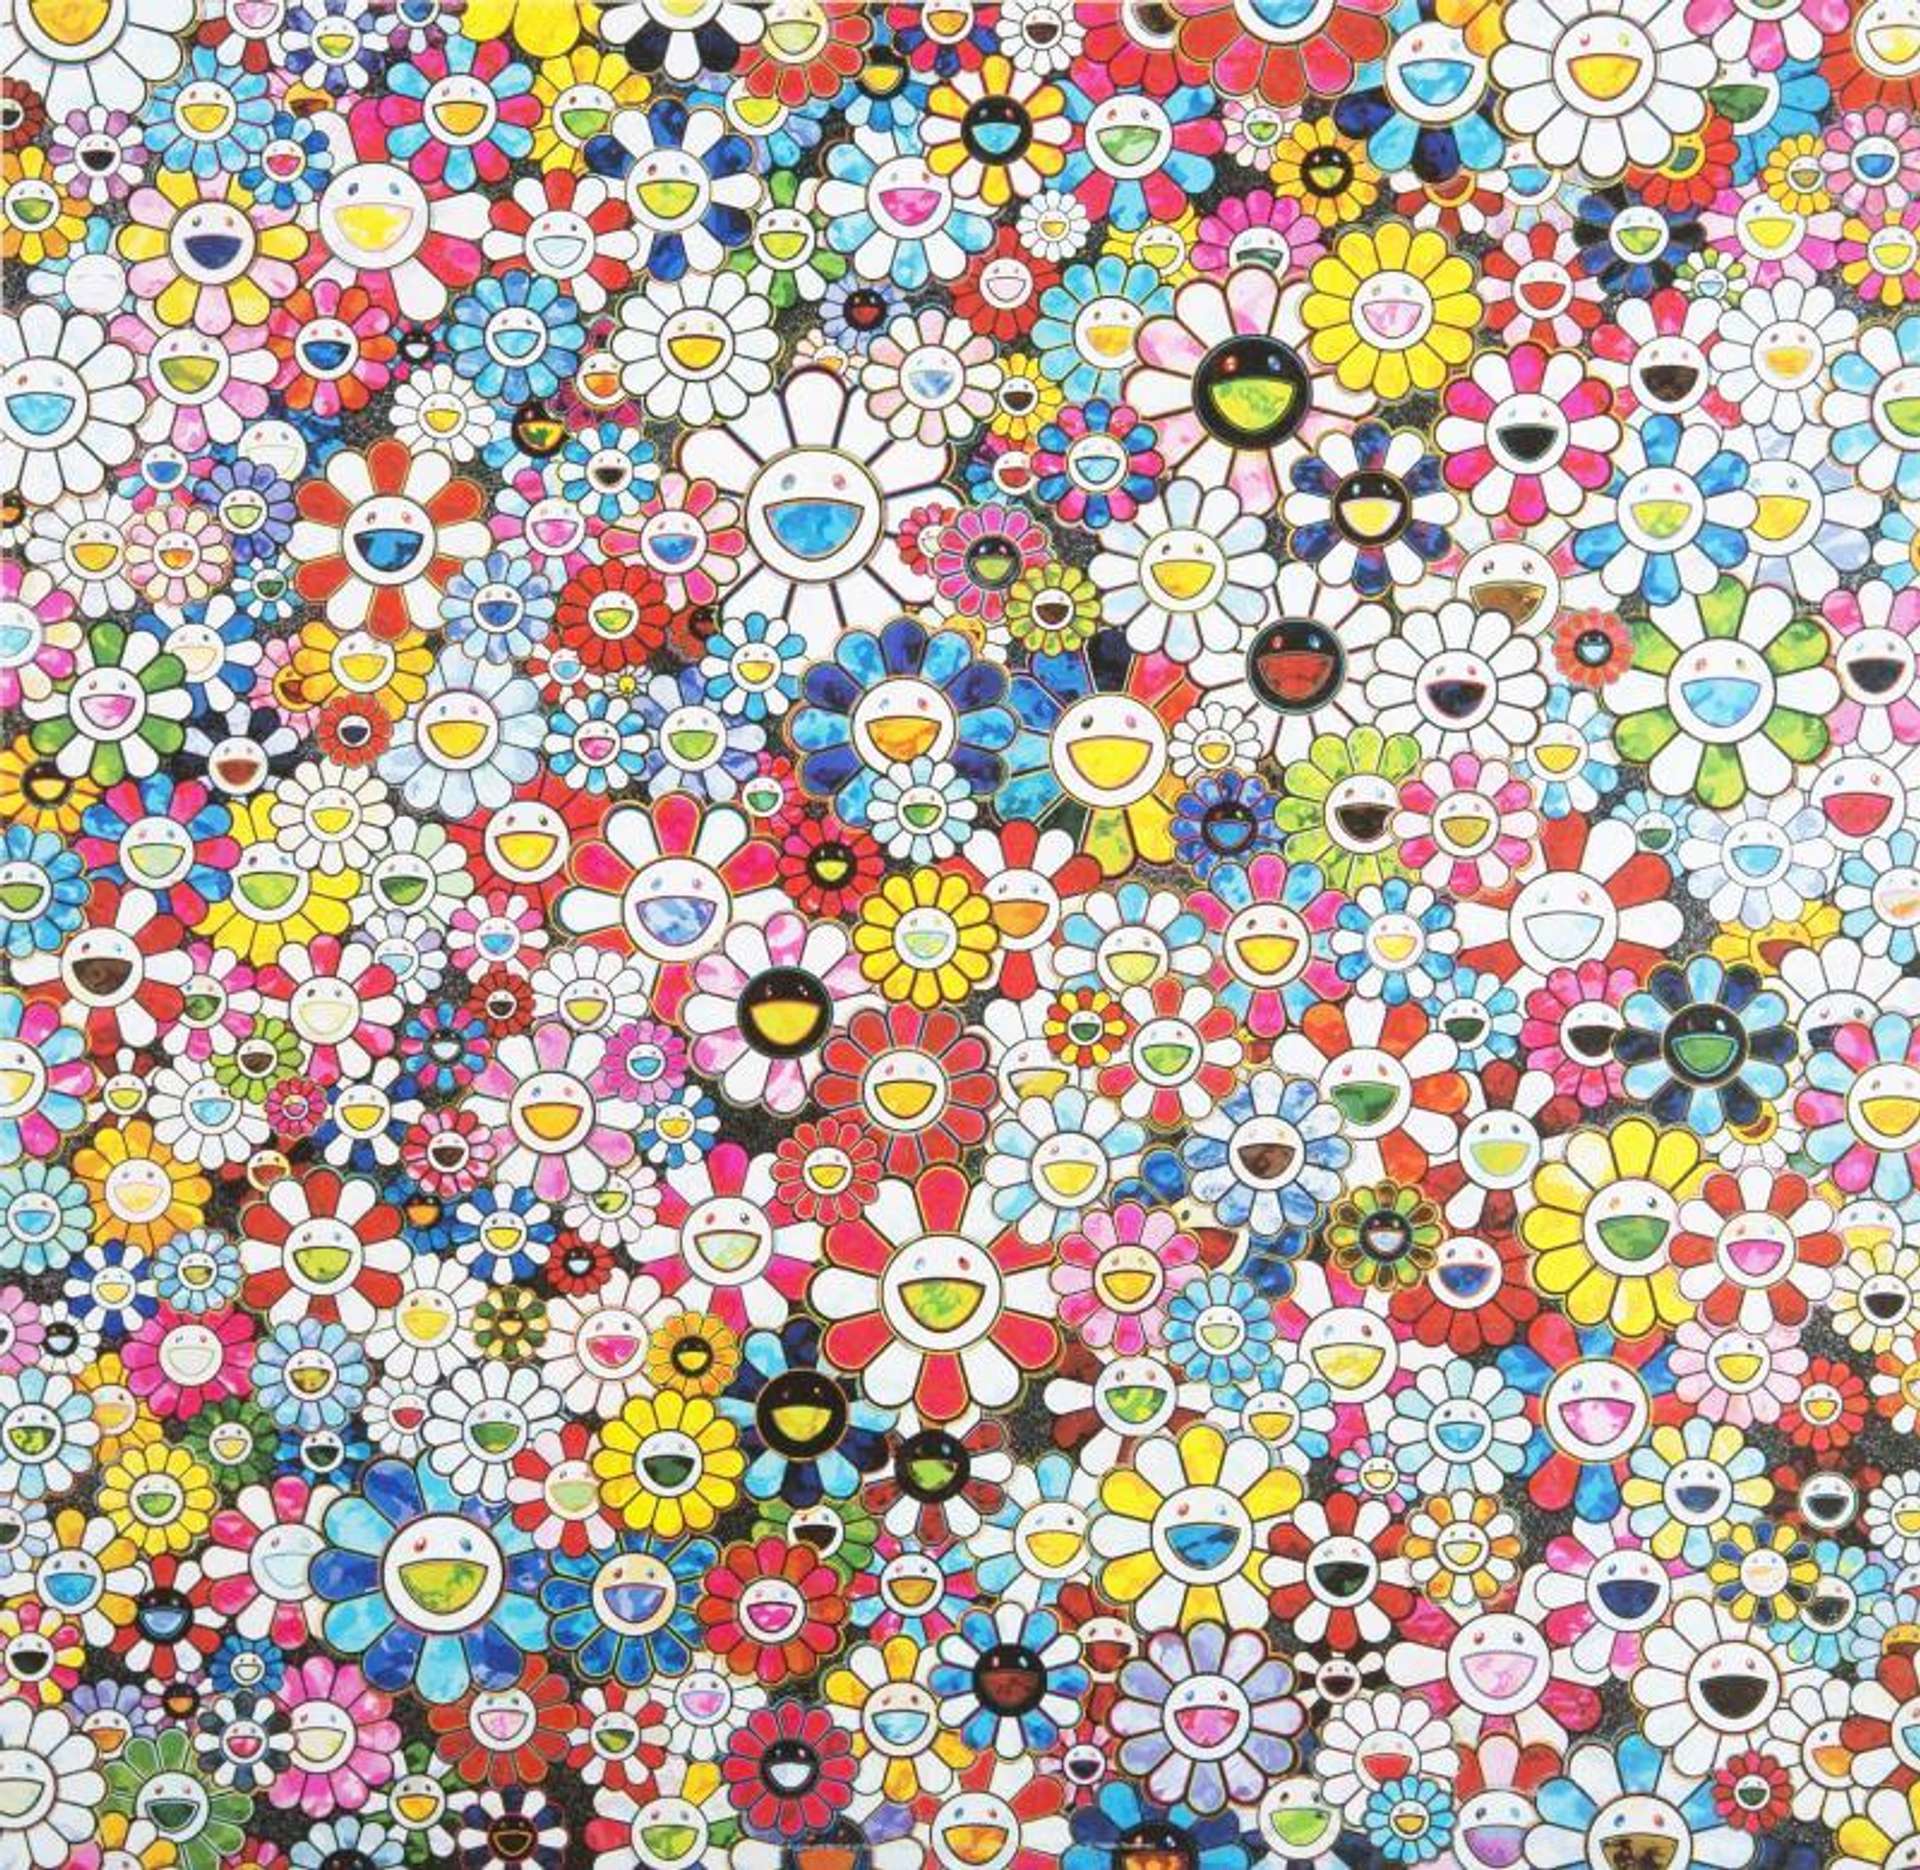 Takashi Murakami: The Future Will Be Full Of Smile! For Sure! - Signed Print